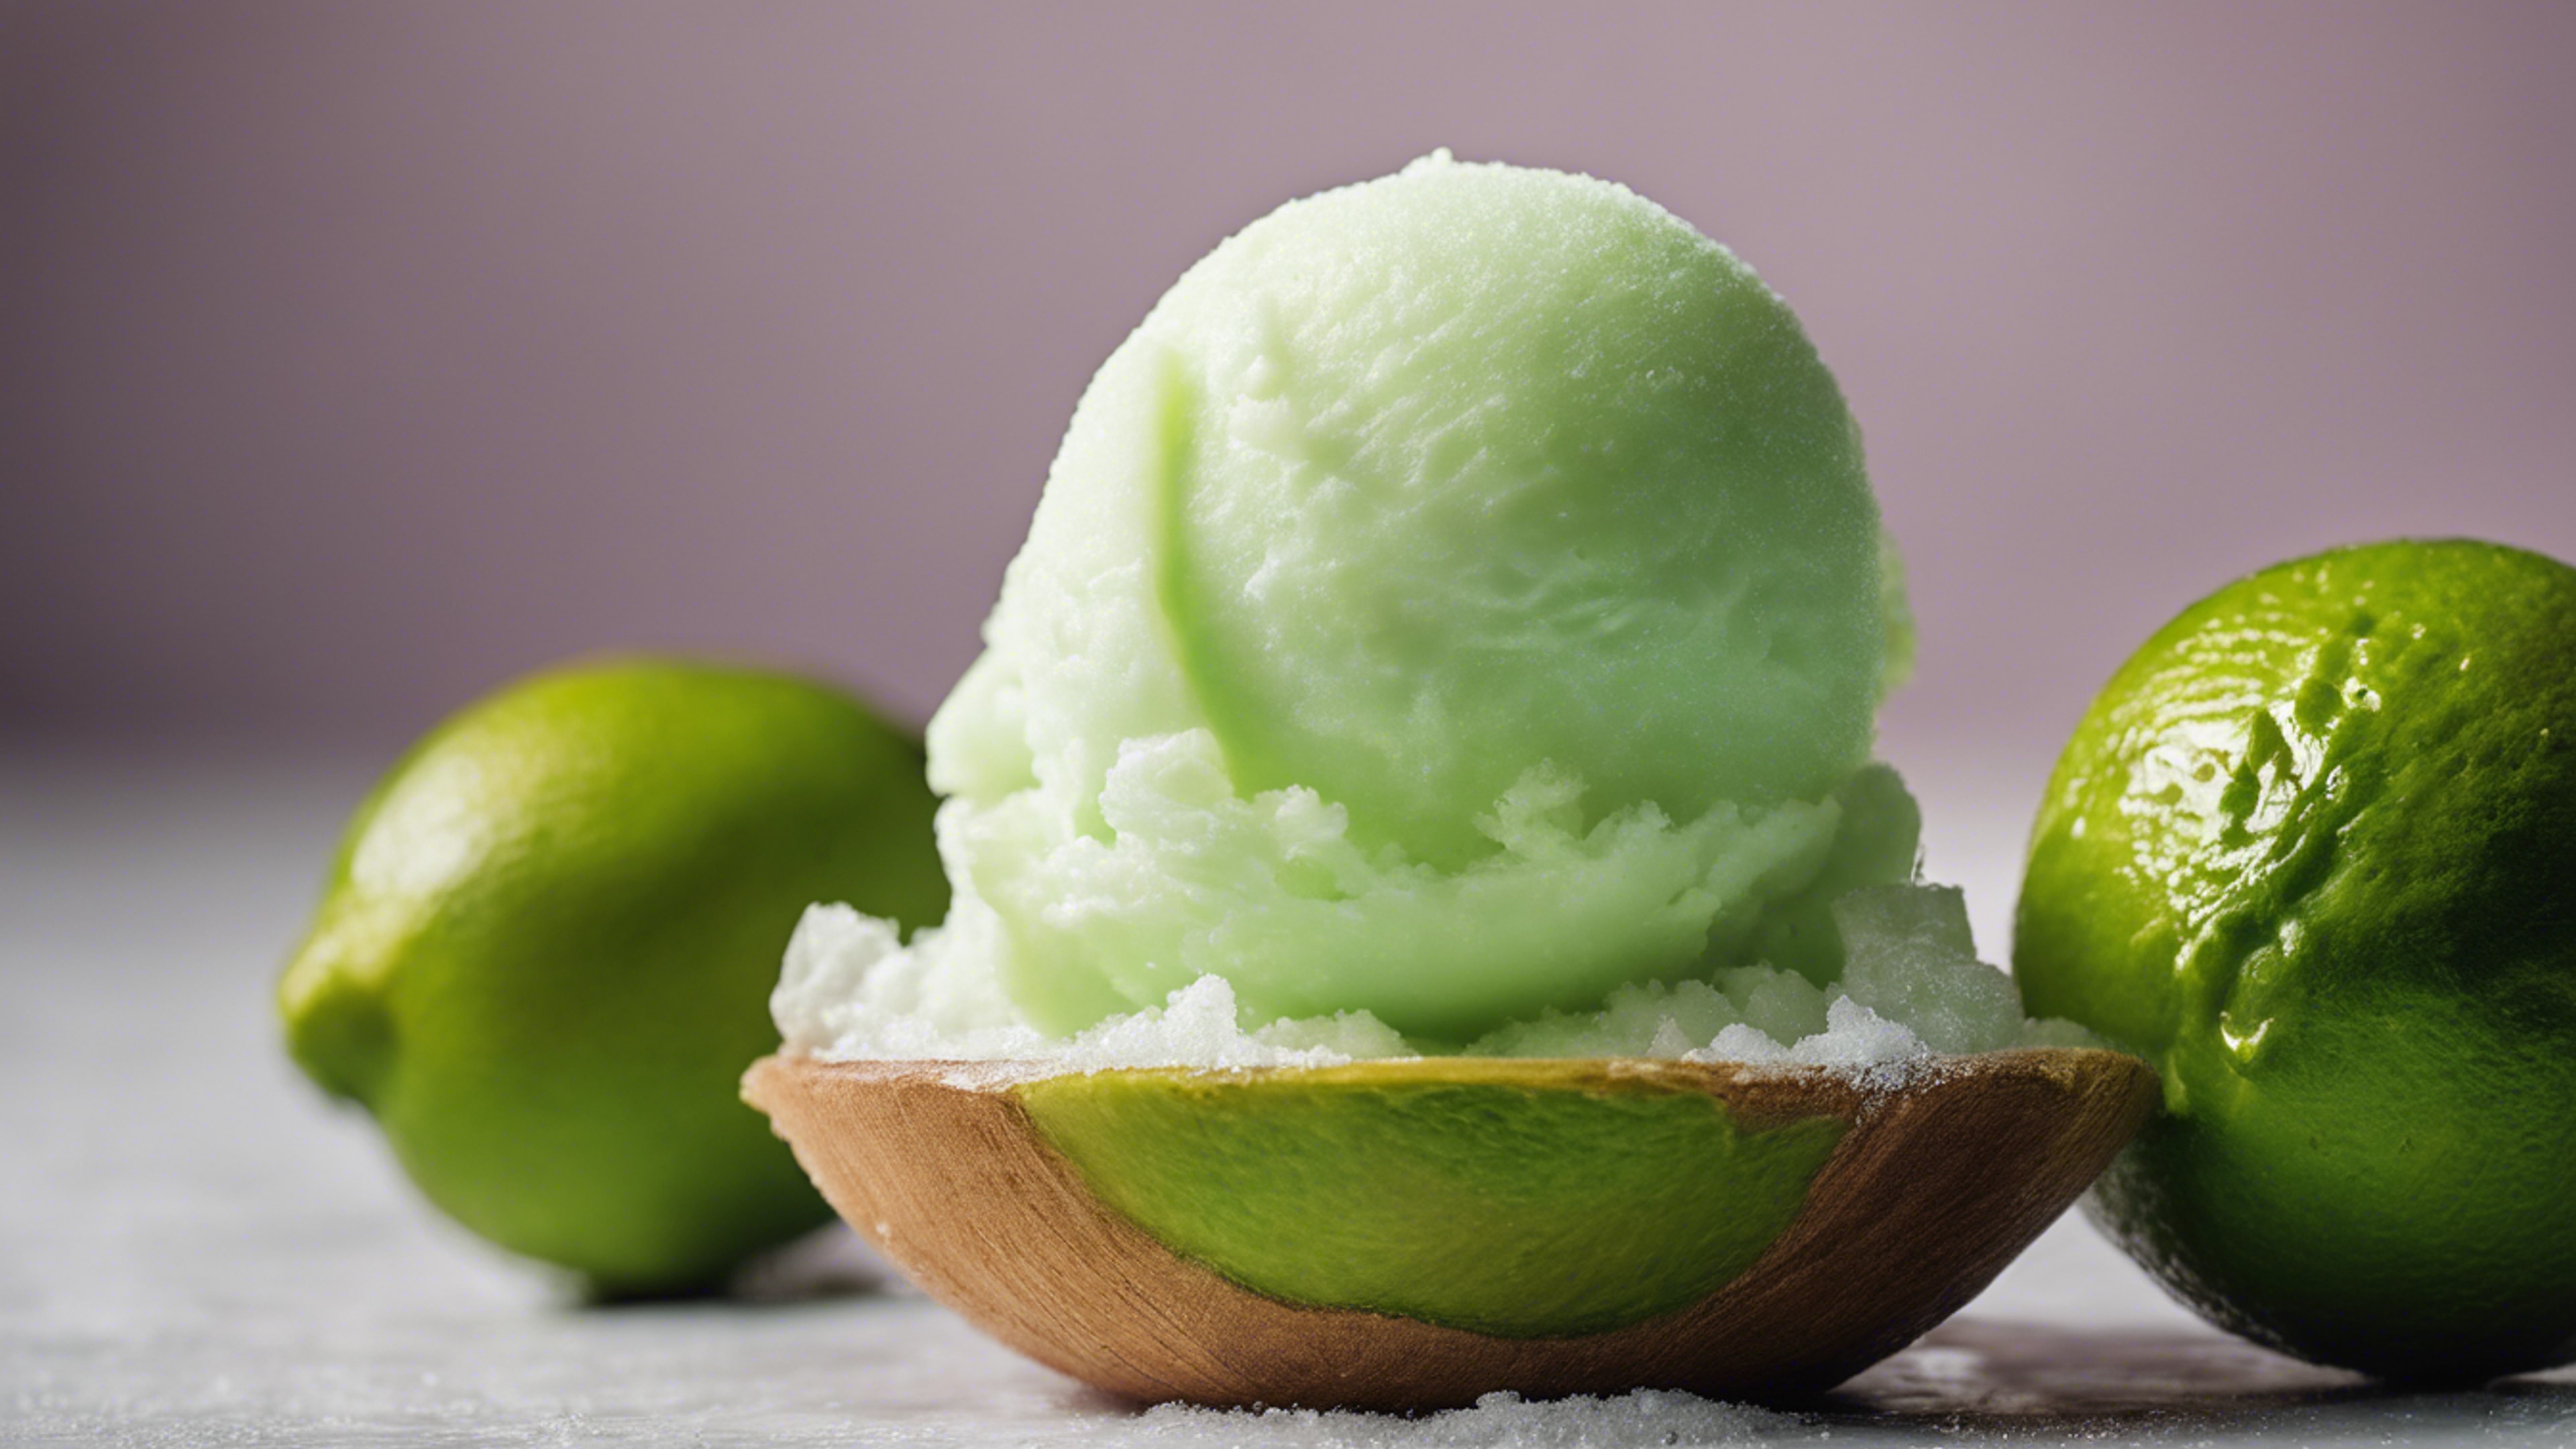 A refreshing lime sorbet in half a lime. Wallpaper[a668216f0615484a943a]